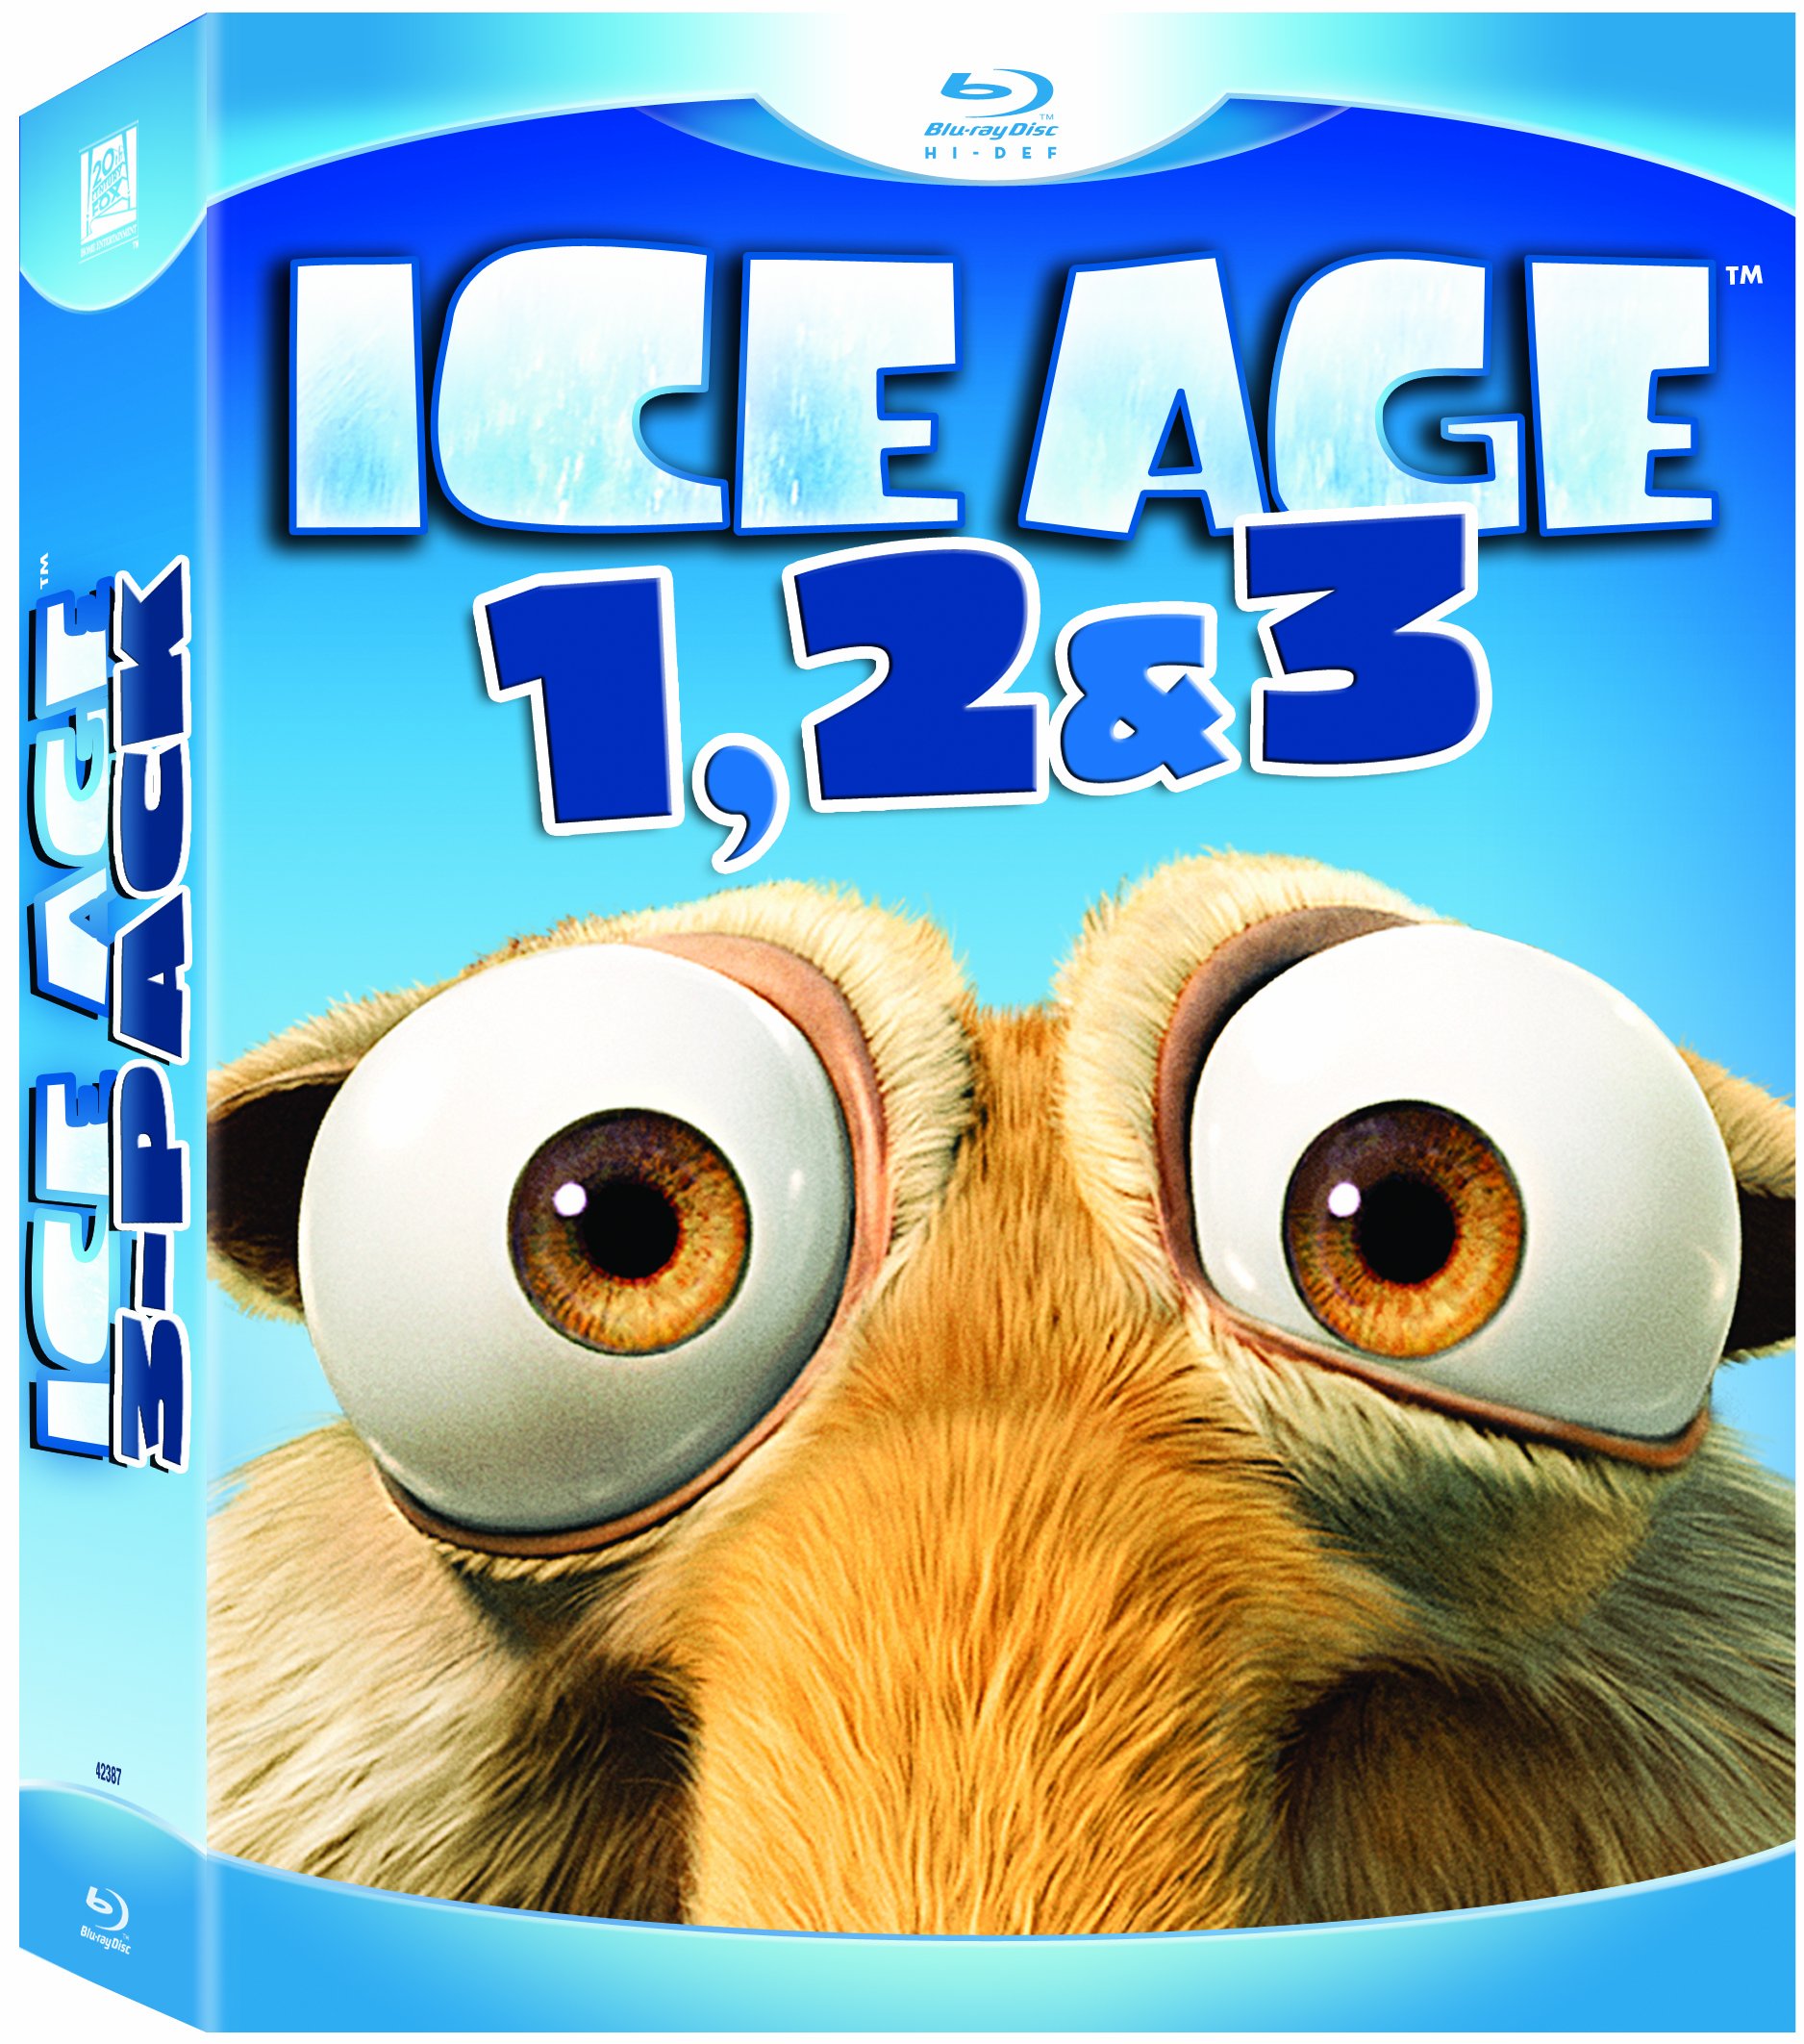 ice-age-1-2-3-movie-purchase-or-watch-online